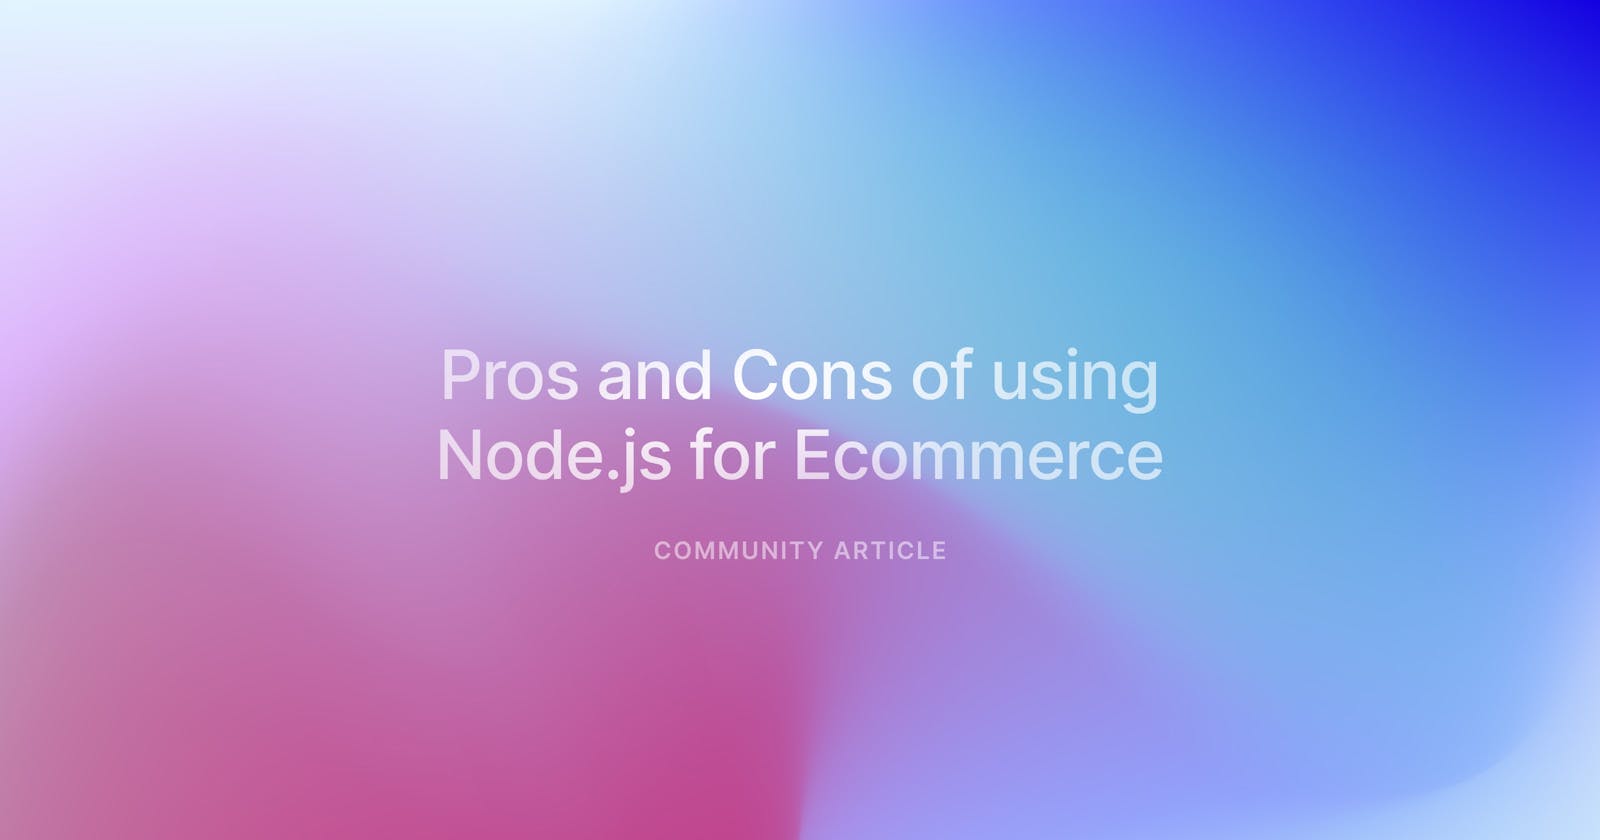 Why You Should Use Node.js for Ecommerce: Pros and Cons